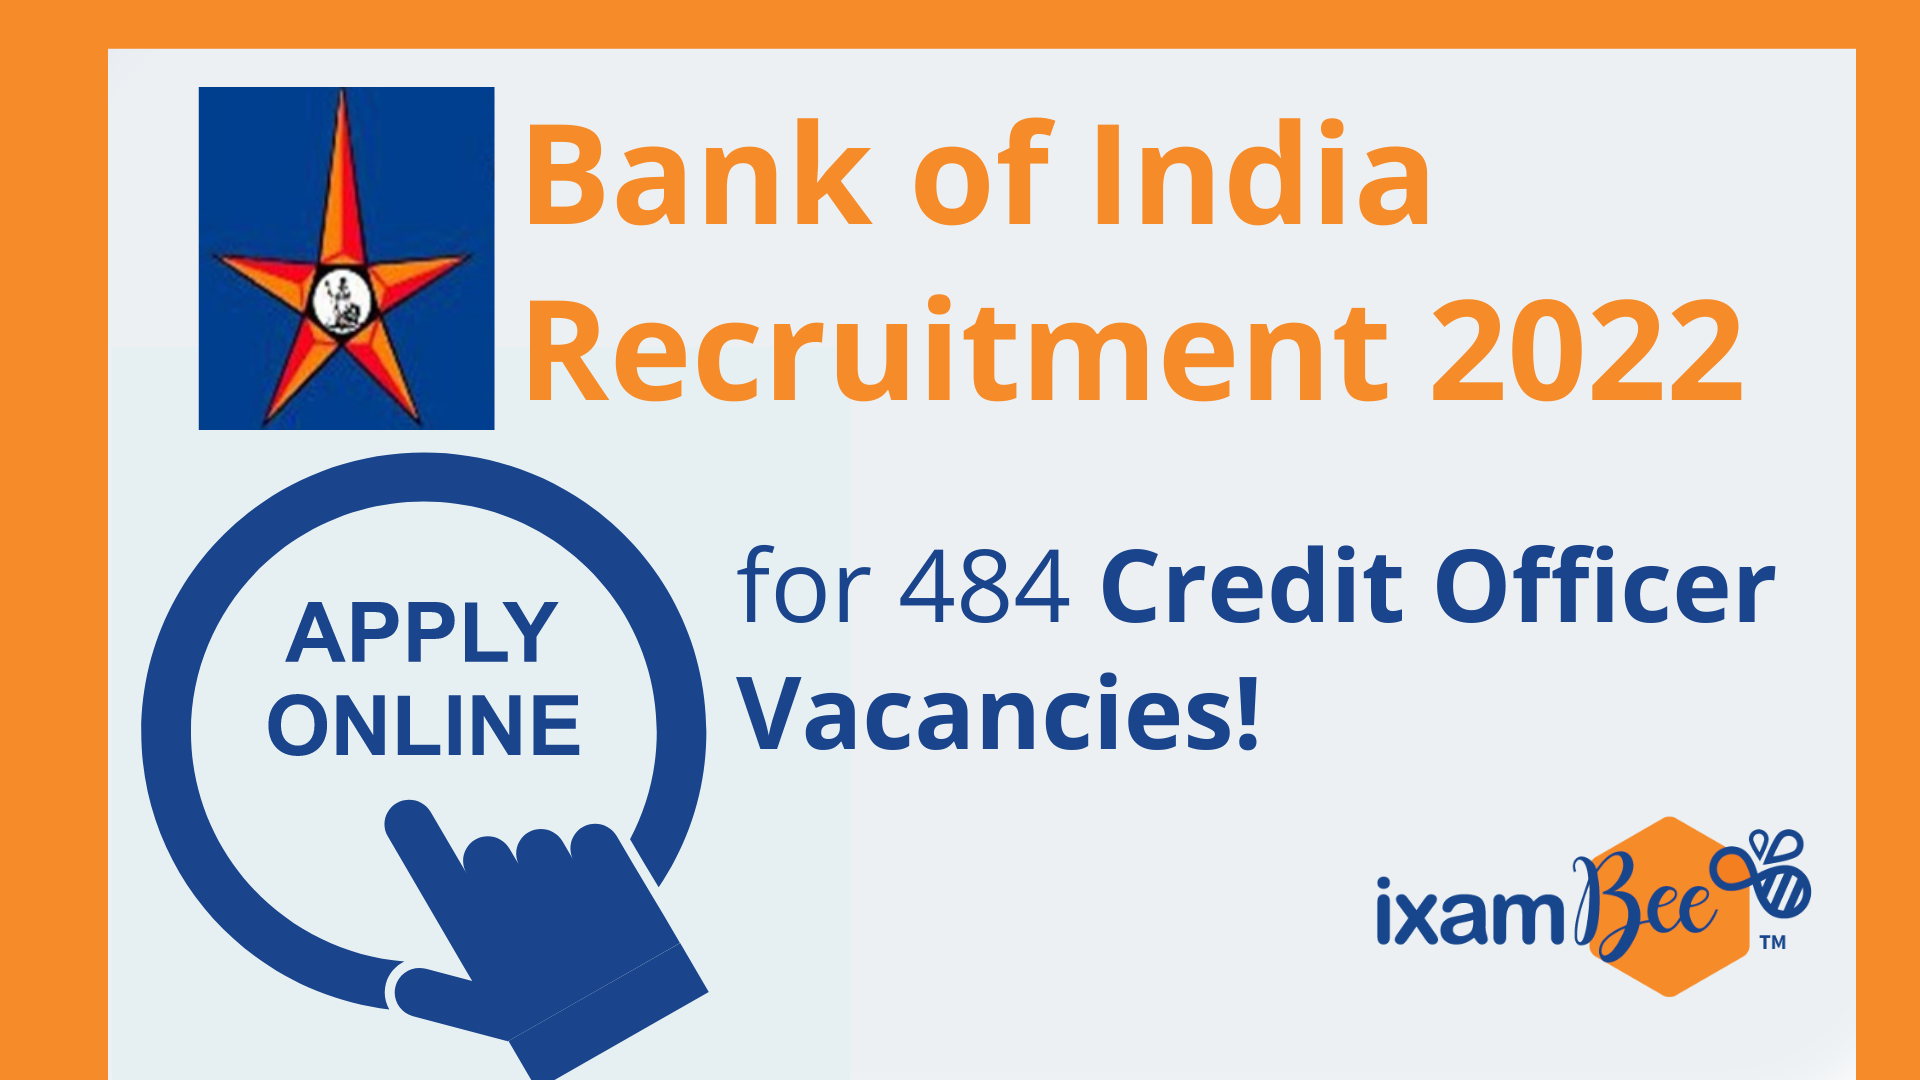 Bank of India Recruitment 2022: Apply Online for 484 Credit Officer Vacancies!